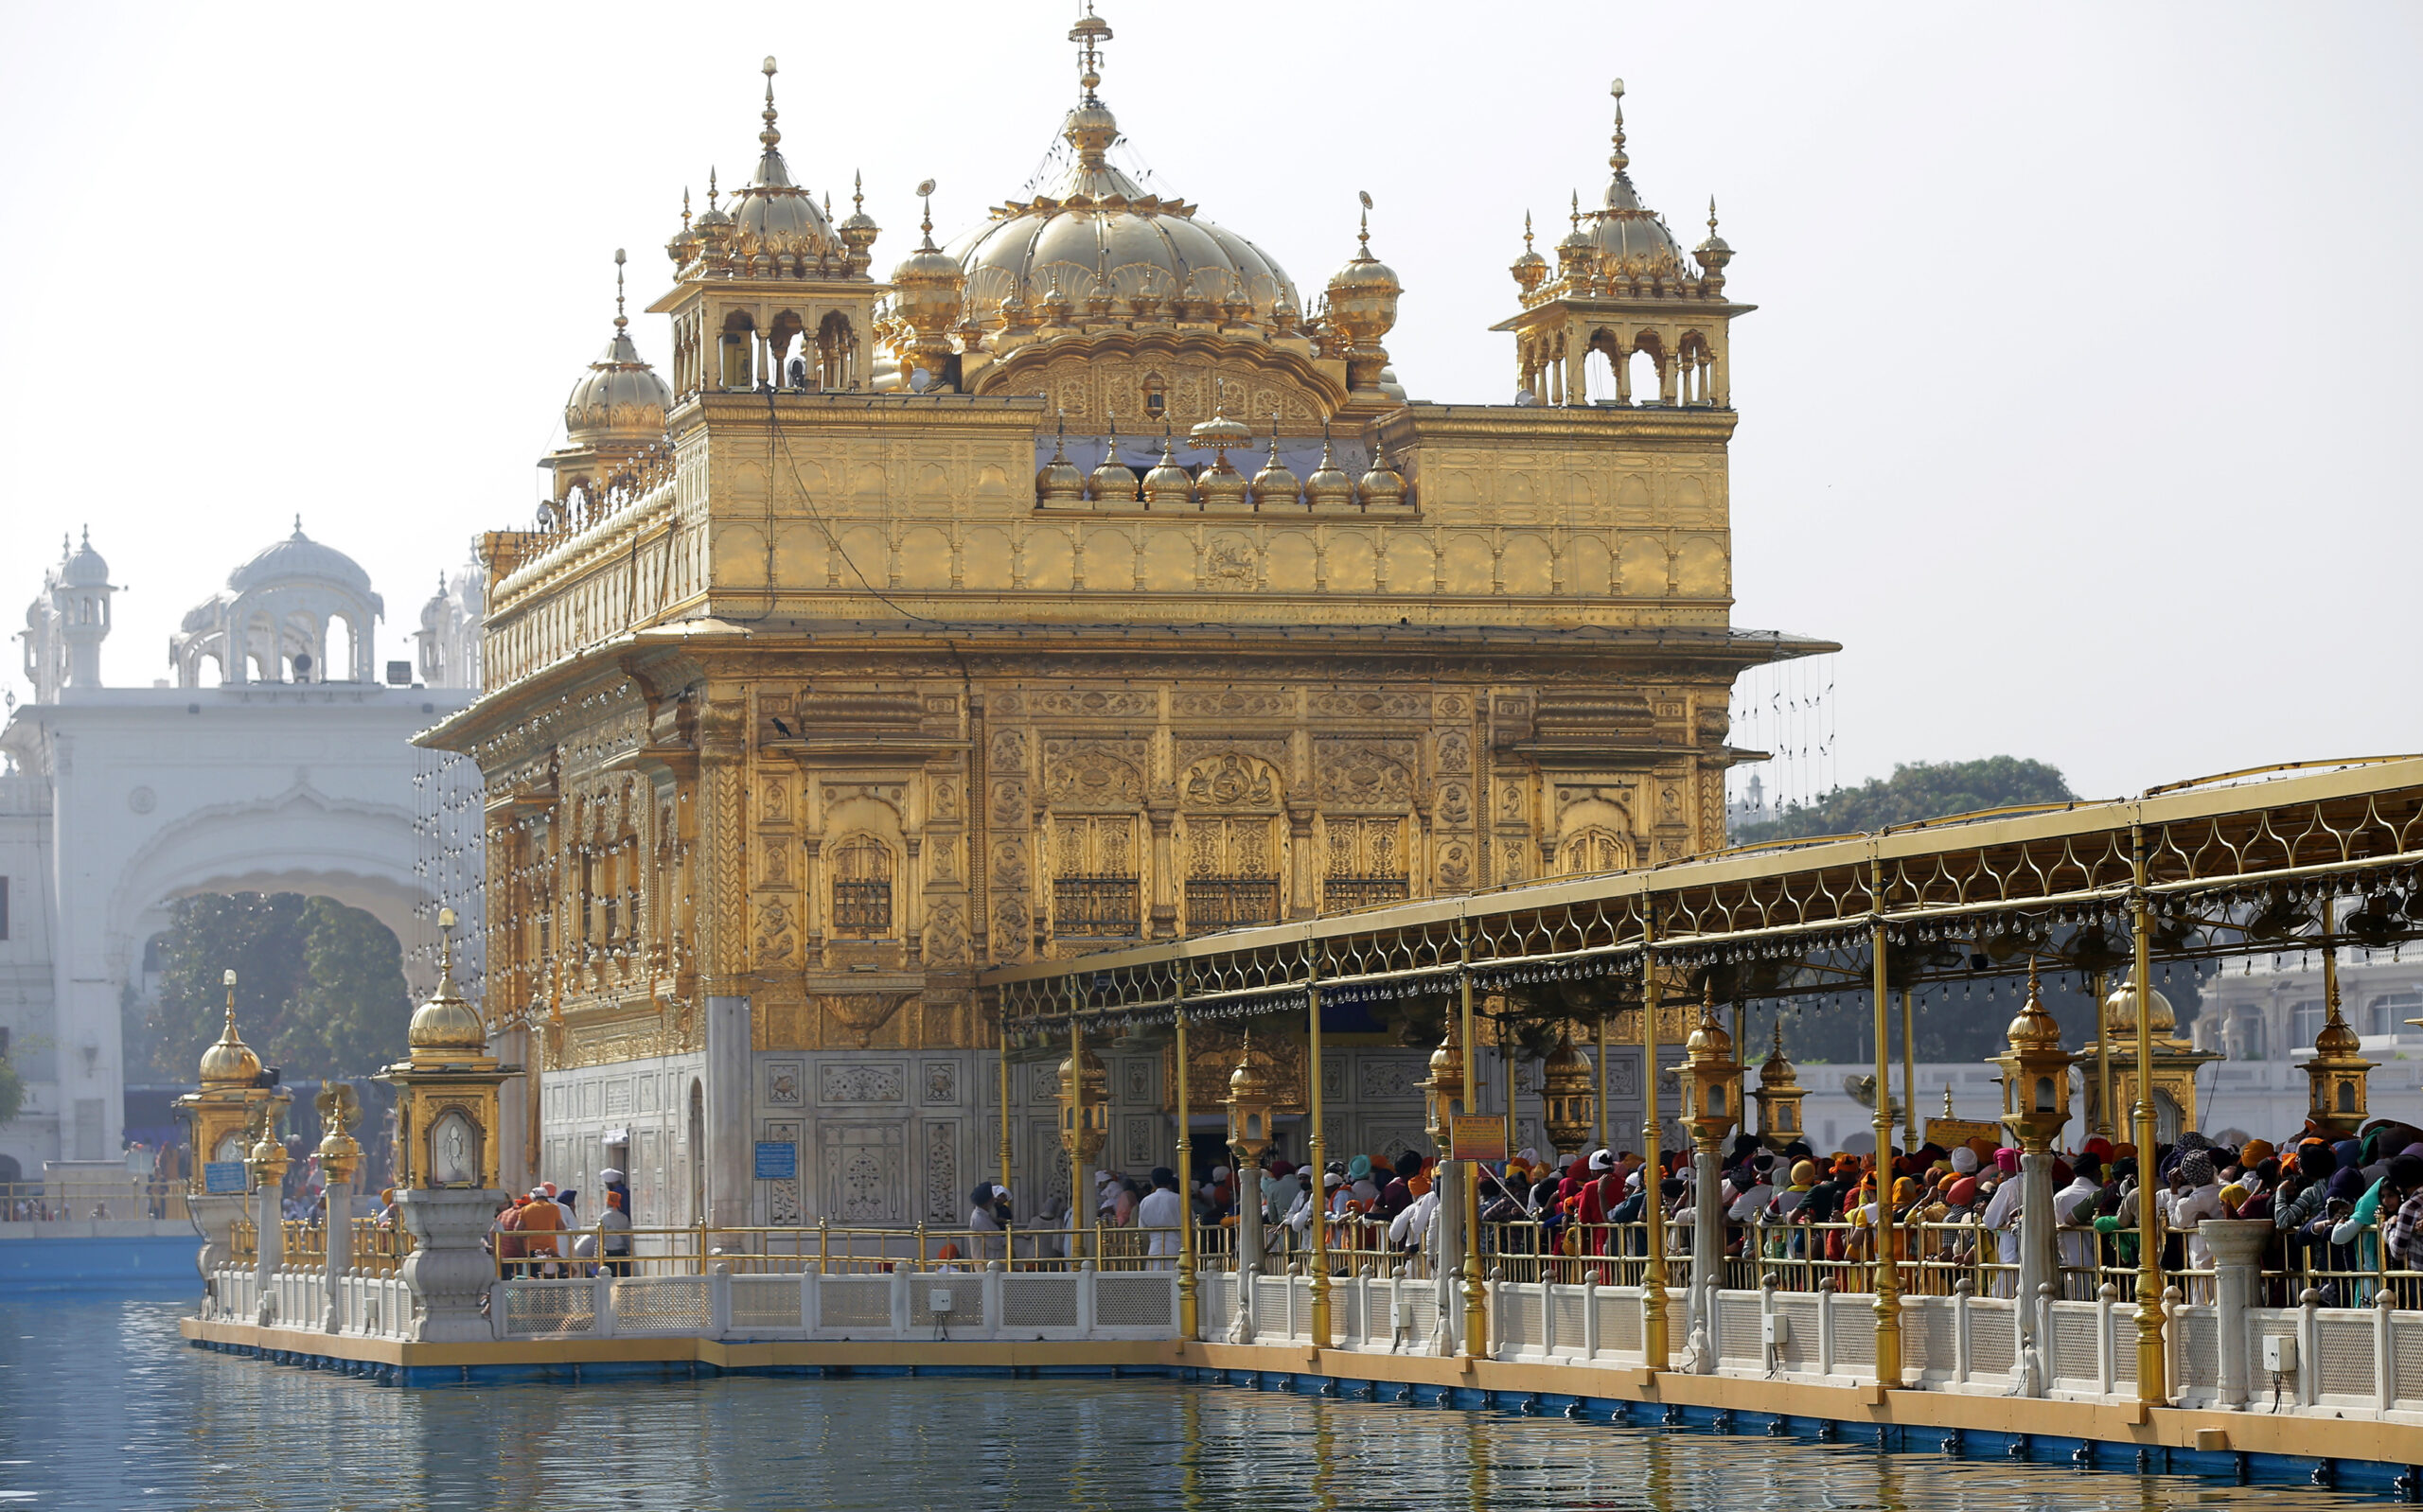 Security stepped up at Golden Temple on Operation Blue Star anniversary